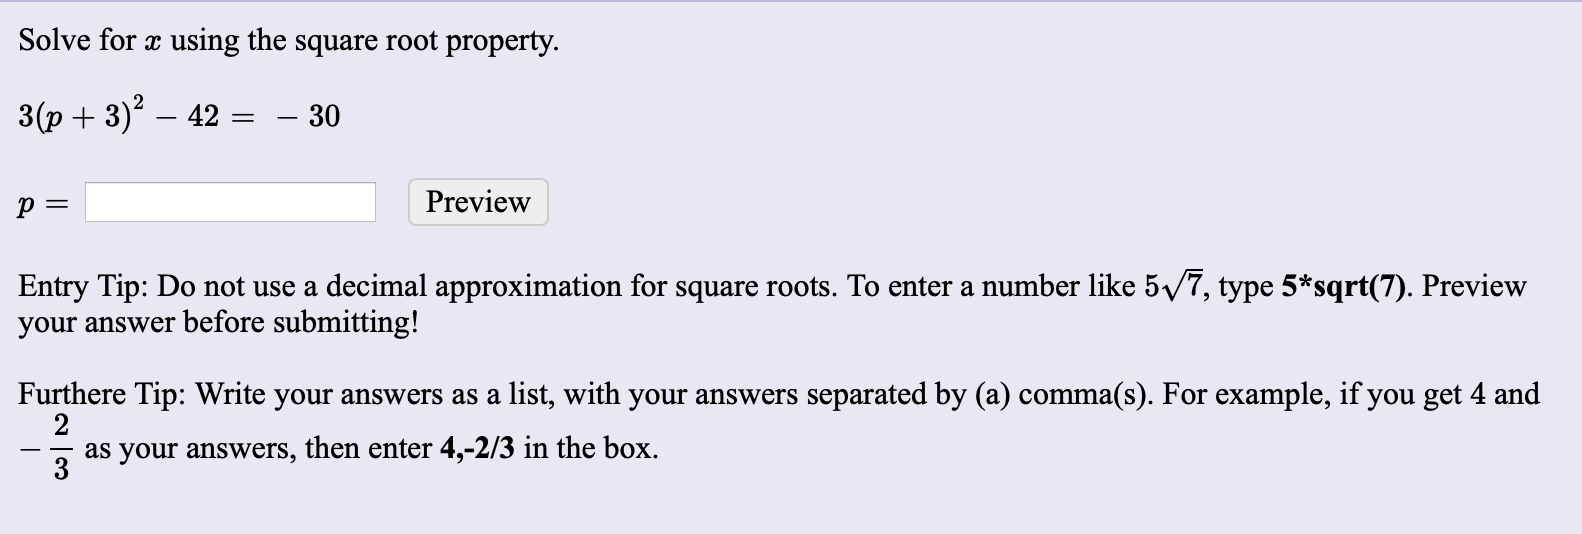 Solve for x using the square root property.
3(p + 3)? – 42
– 30
Preview
Entry Tip: Do not use a decimal approximation for square roots. To enter a number like 5/7, type 5*sqrt(7). Preview
your answer before submitting!
Furthere Tip: Write your answers as a list, with your answers separated by (a) comma(s). For example, if you get 4 and
as your answers, then enter 4,-2/3 in the box.
3
